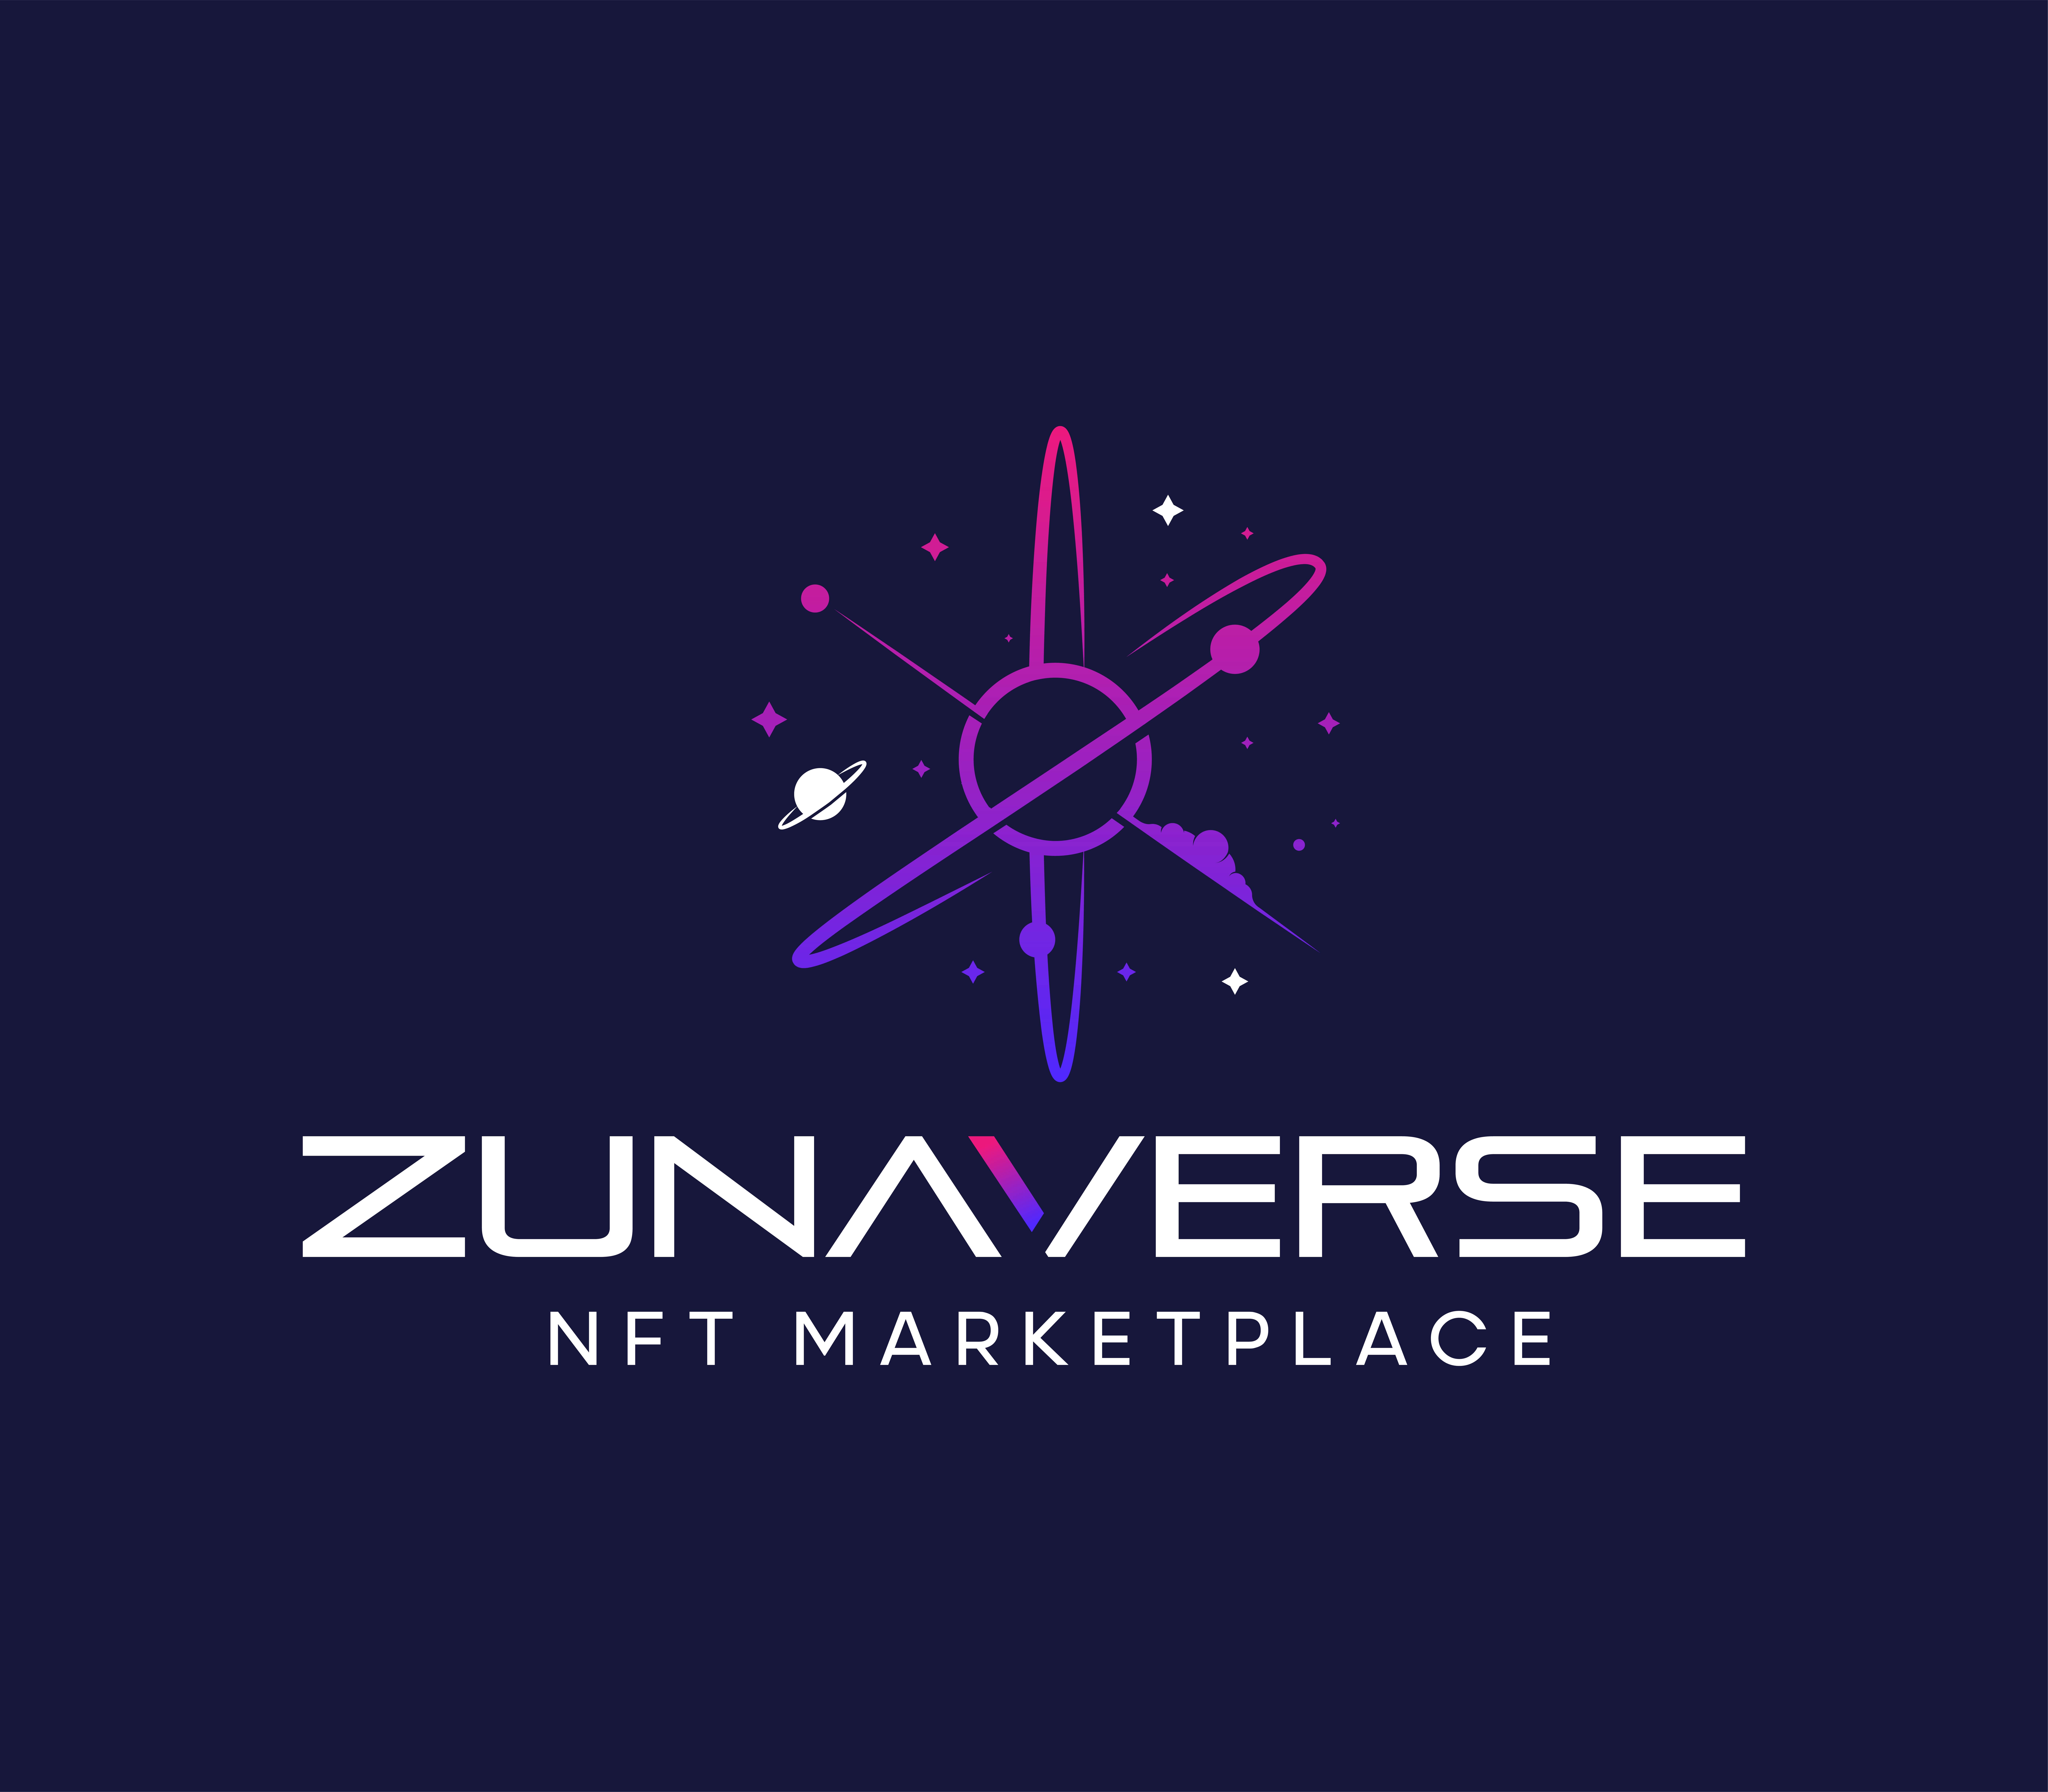 ZUNAVERSE.io and MetaSetGO Team Up to Bring Next-Level NFT and Mobile Gaming Innovation